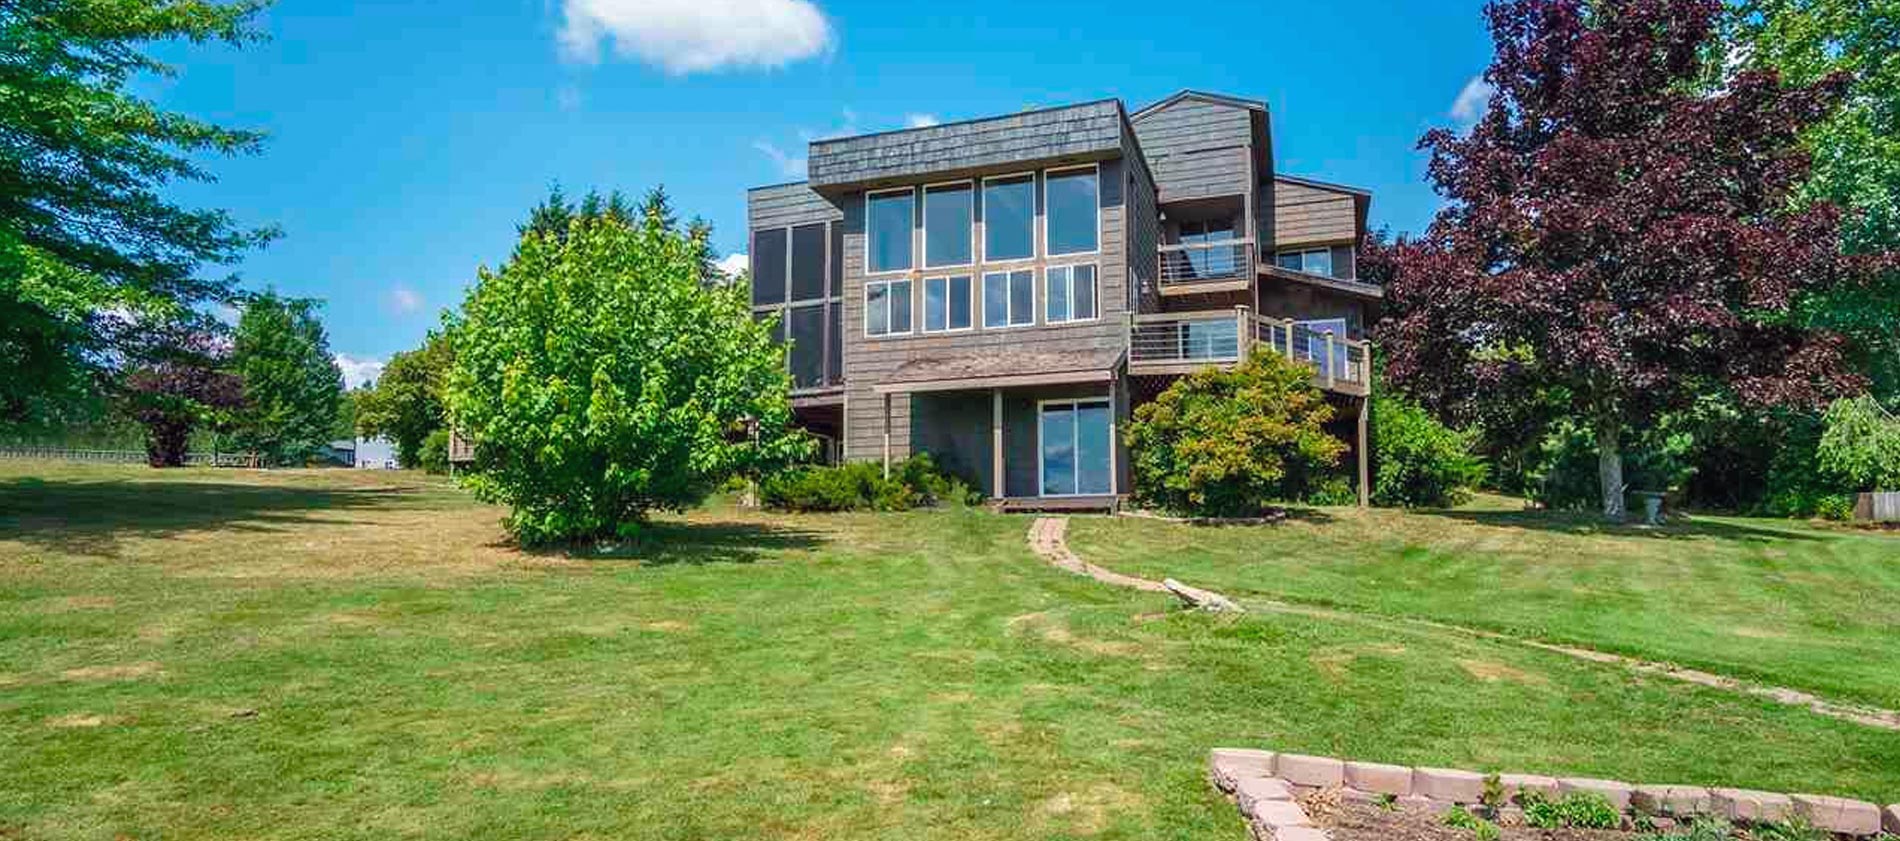 This beautiful property, set upon 400' of gentle sloped south facing shore of Lake Pend Orielle